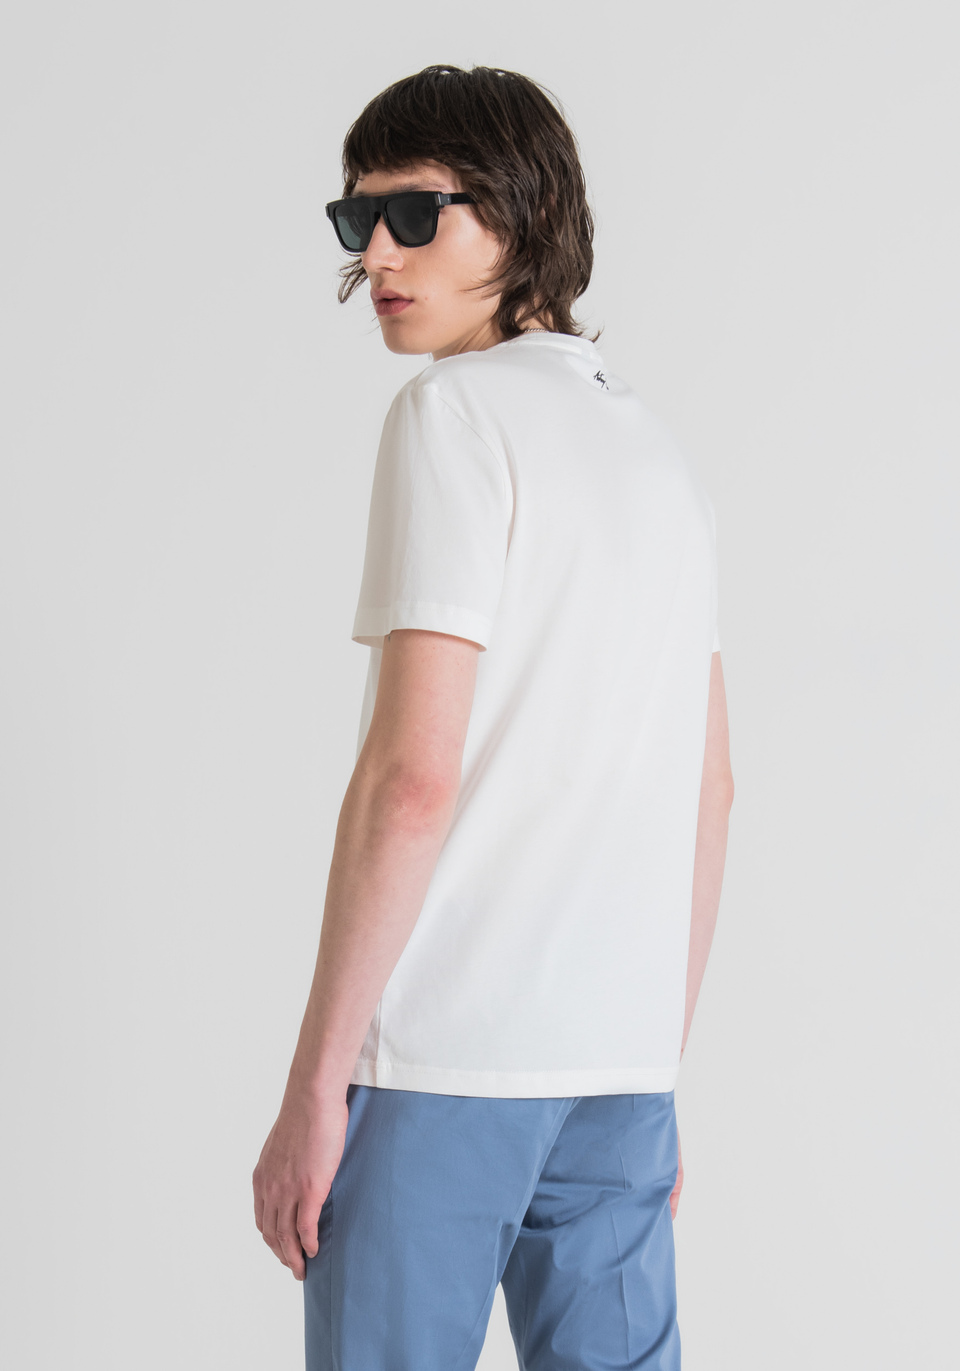 SLIM FIT T-SHIRT IN SOFT COTTON WITH FRONT PRINT - Antony Morato Online Shop